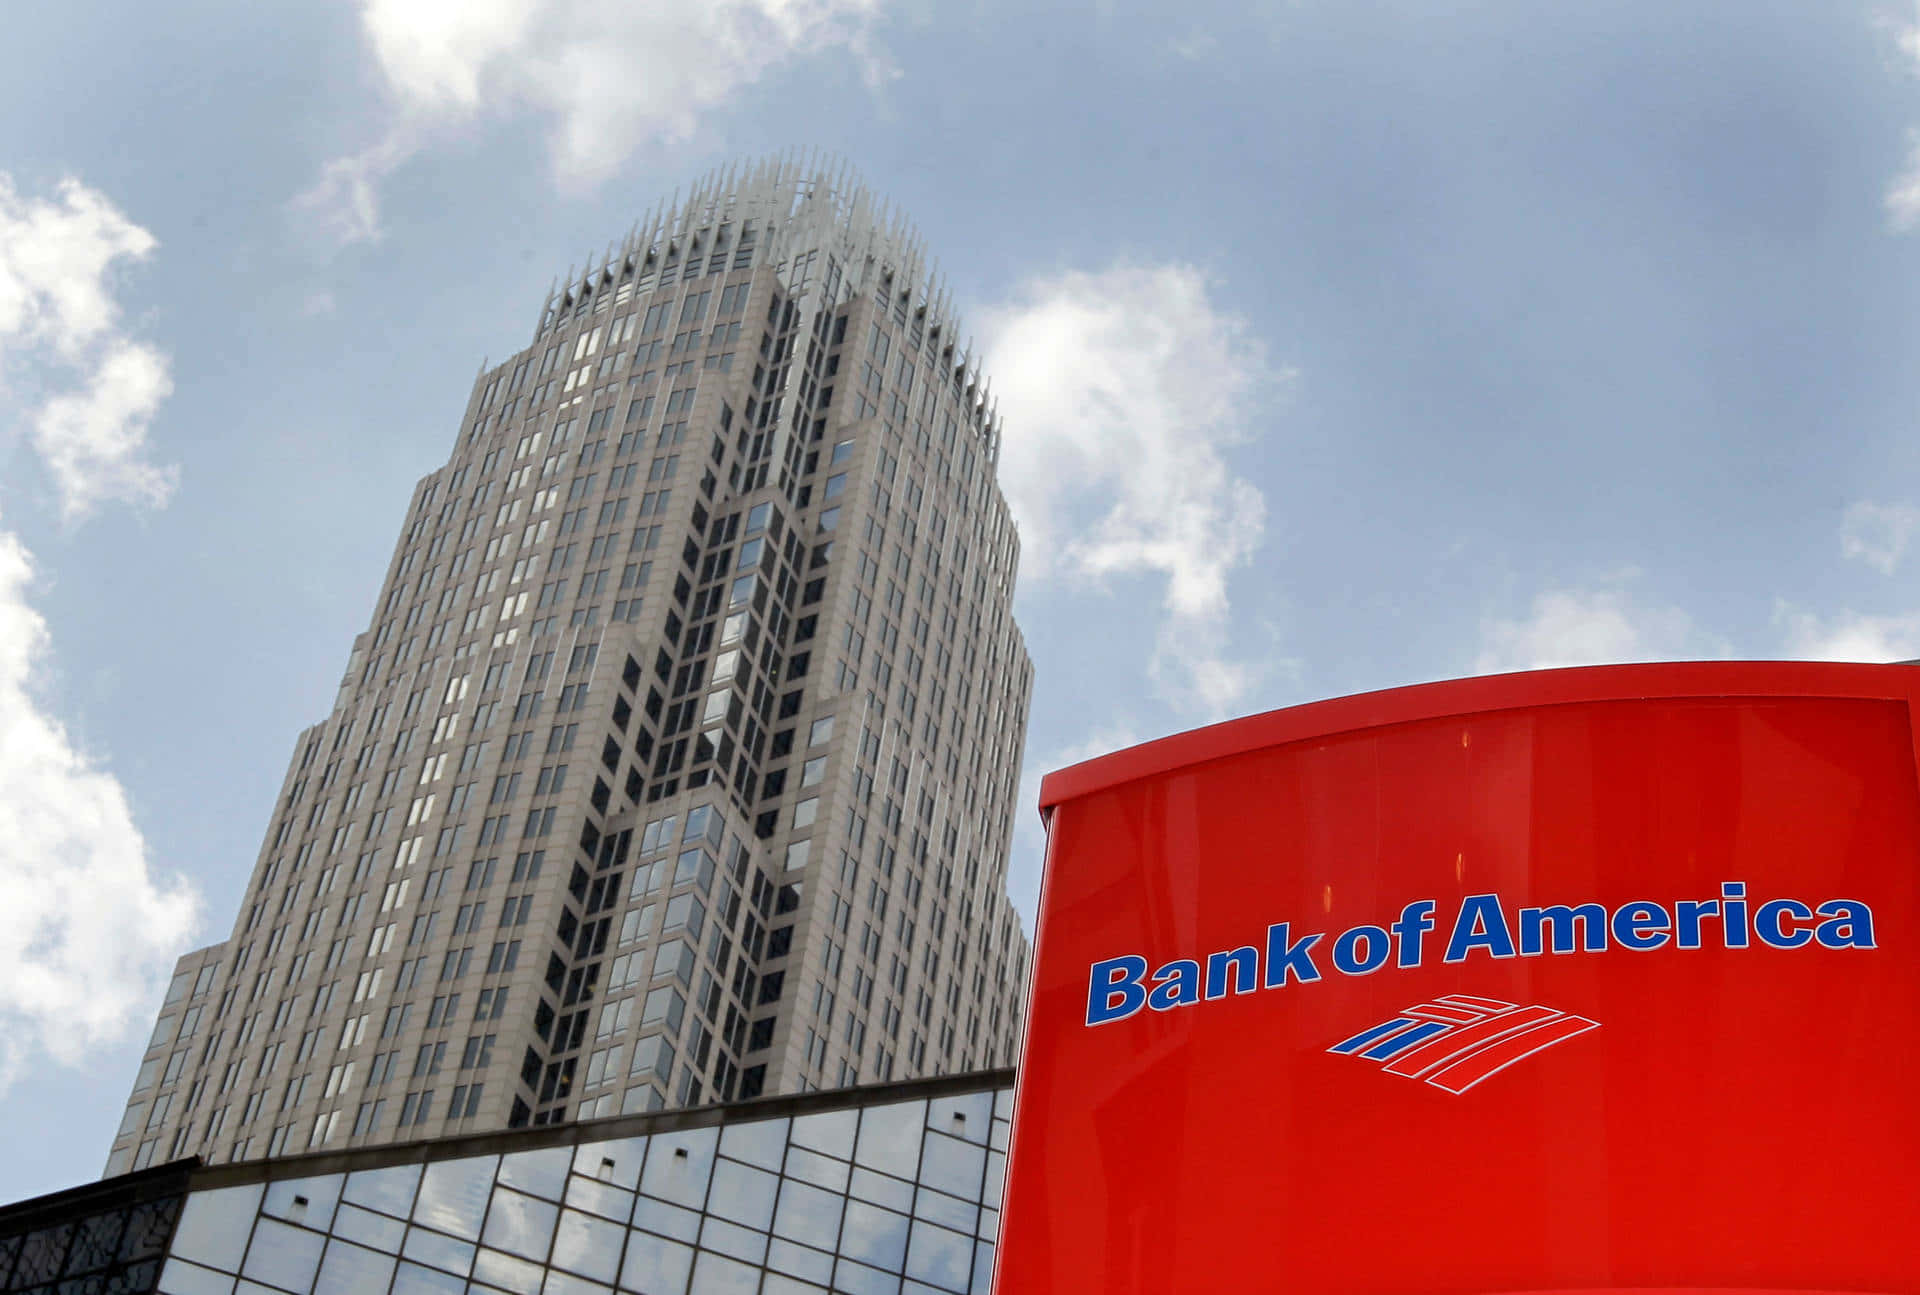 Enjoy the convenience and security of banking with Bank of America